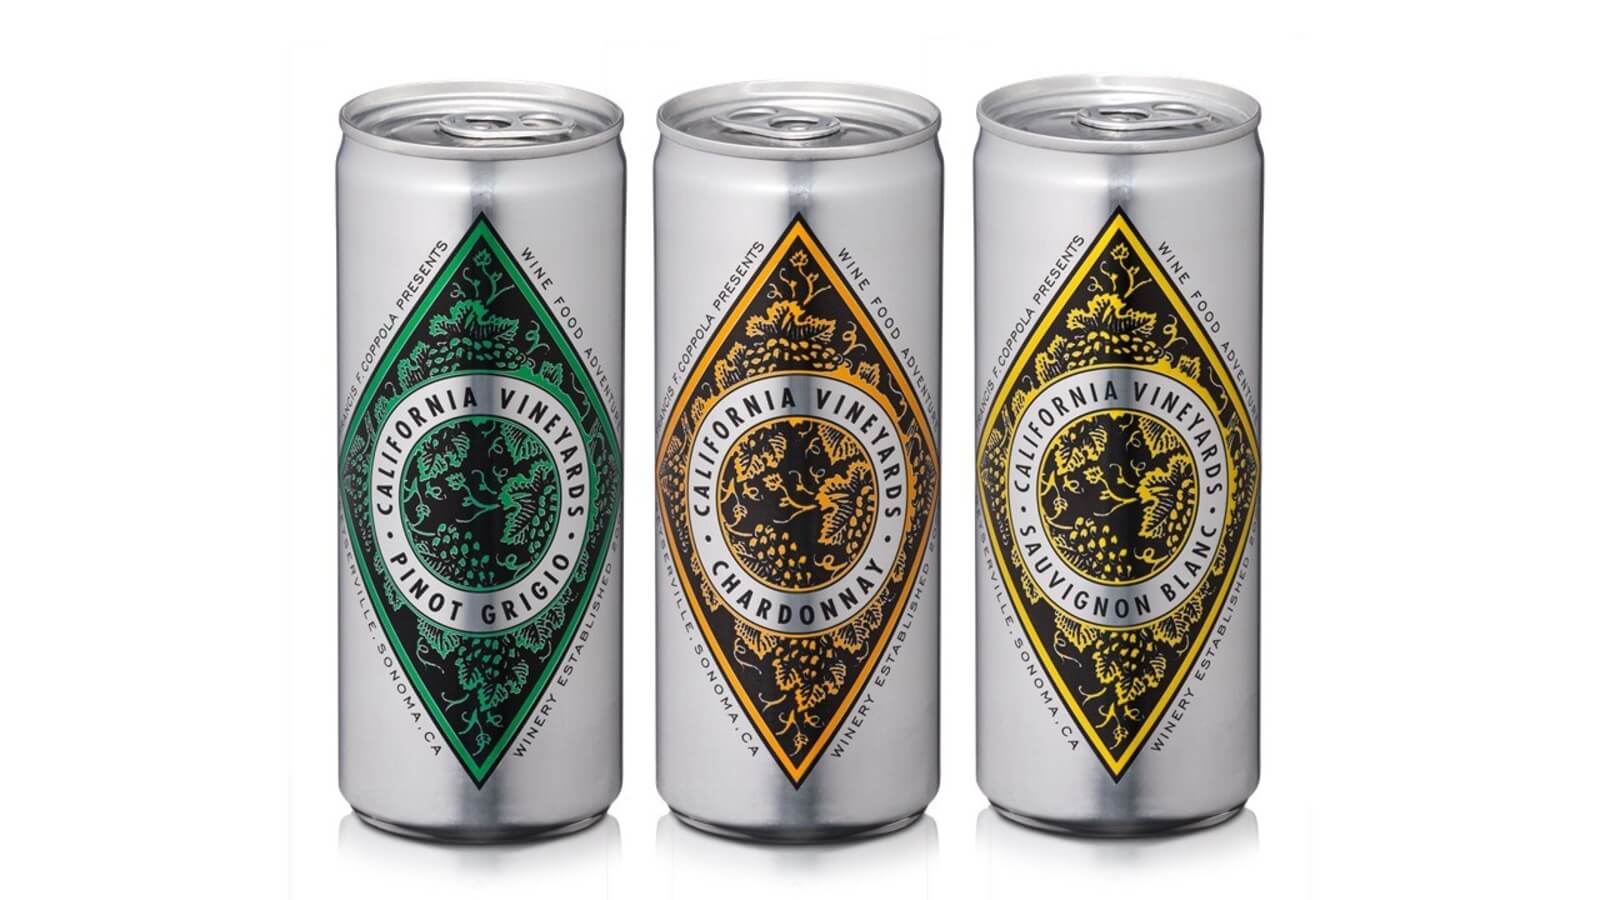 Francis Ford Coppola Winery launches Diamond Collection white wines in a can - What's Shakin' week of July 24